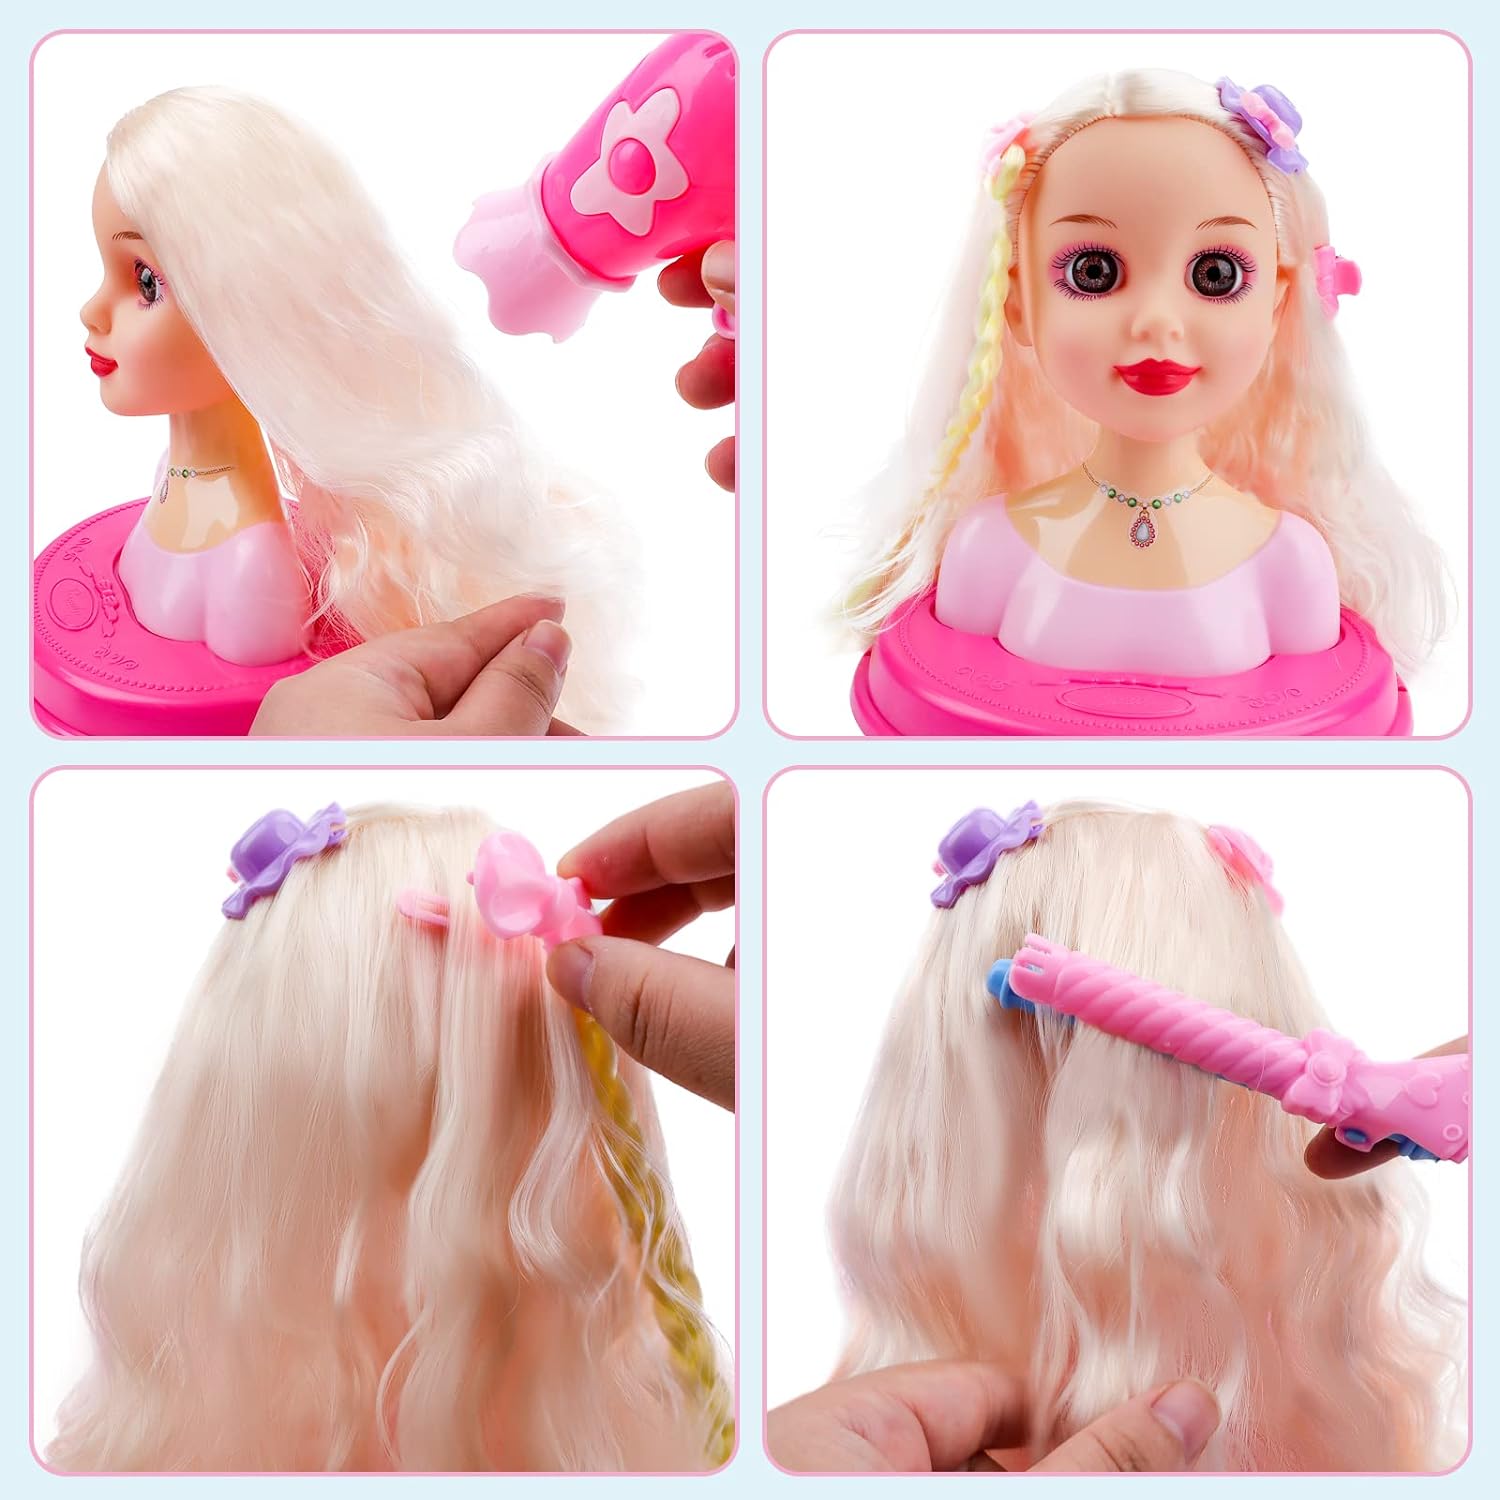 Dolls Styling & Make Up Heads, All Toy Dollies